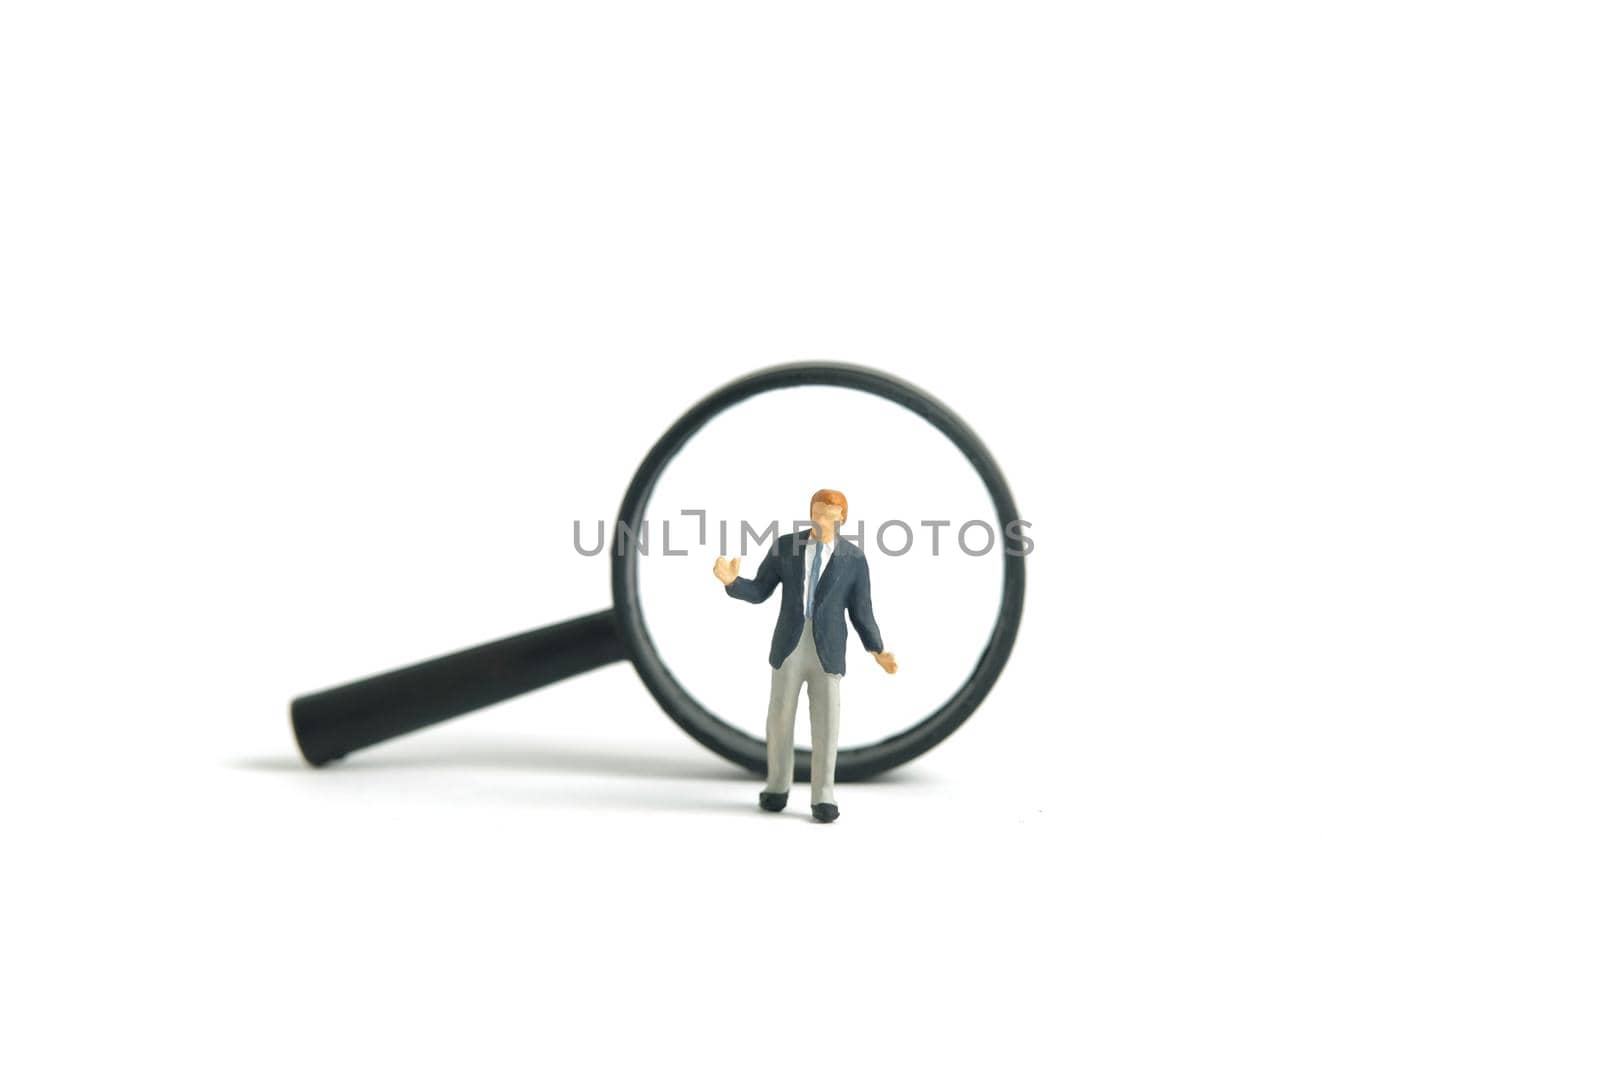 Miniature people toy figure photography. A shrugging businessman finding solution standing in front of magnifier glass. Isolated on white background. Image photo